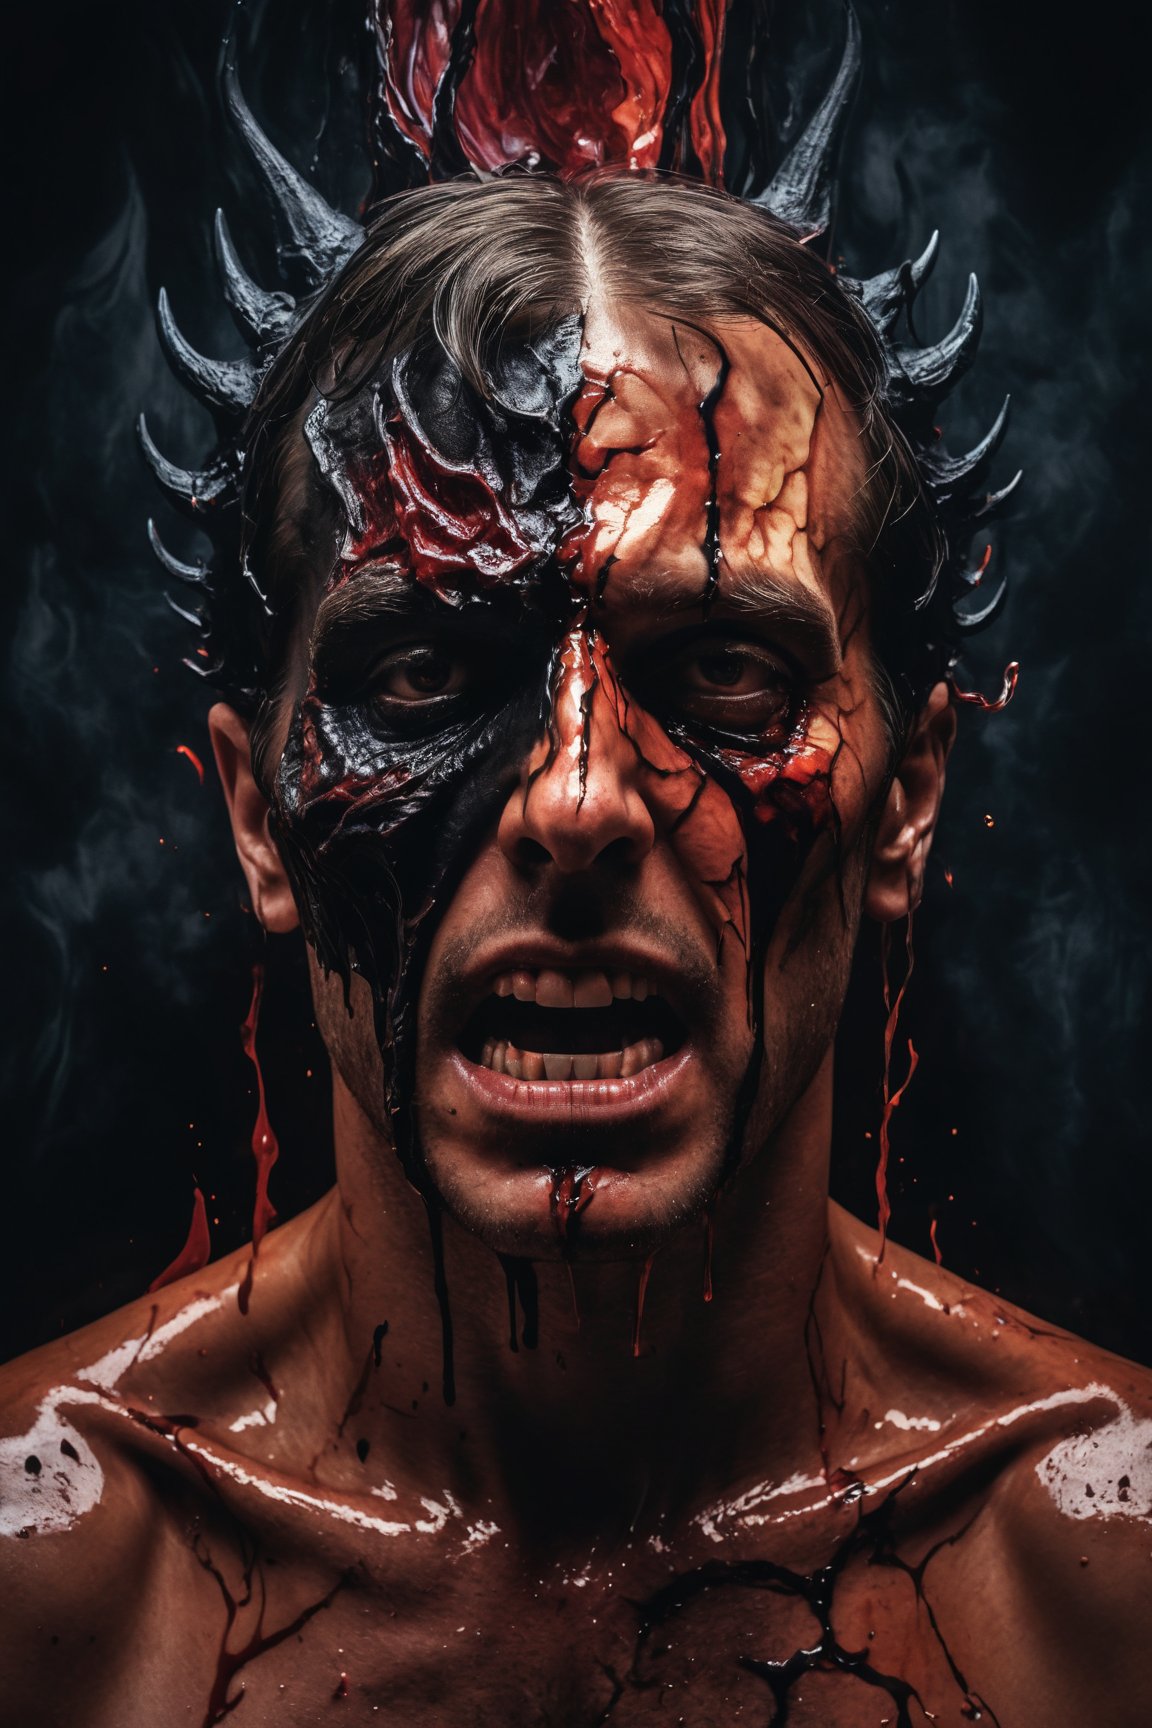 (best quality, 8K, highres, masterpiece), (surreal, evocative portrait), portraying a man consumed by his inner demon, with one half melting into an abstract representation of his dark side.  Use textures and symbolism to capture the psychological struggle of good versus evil. 